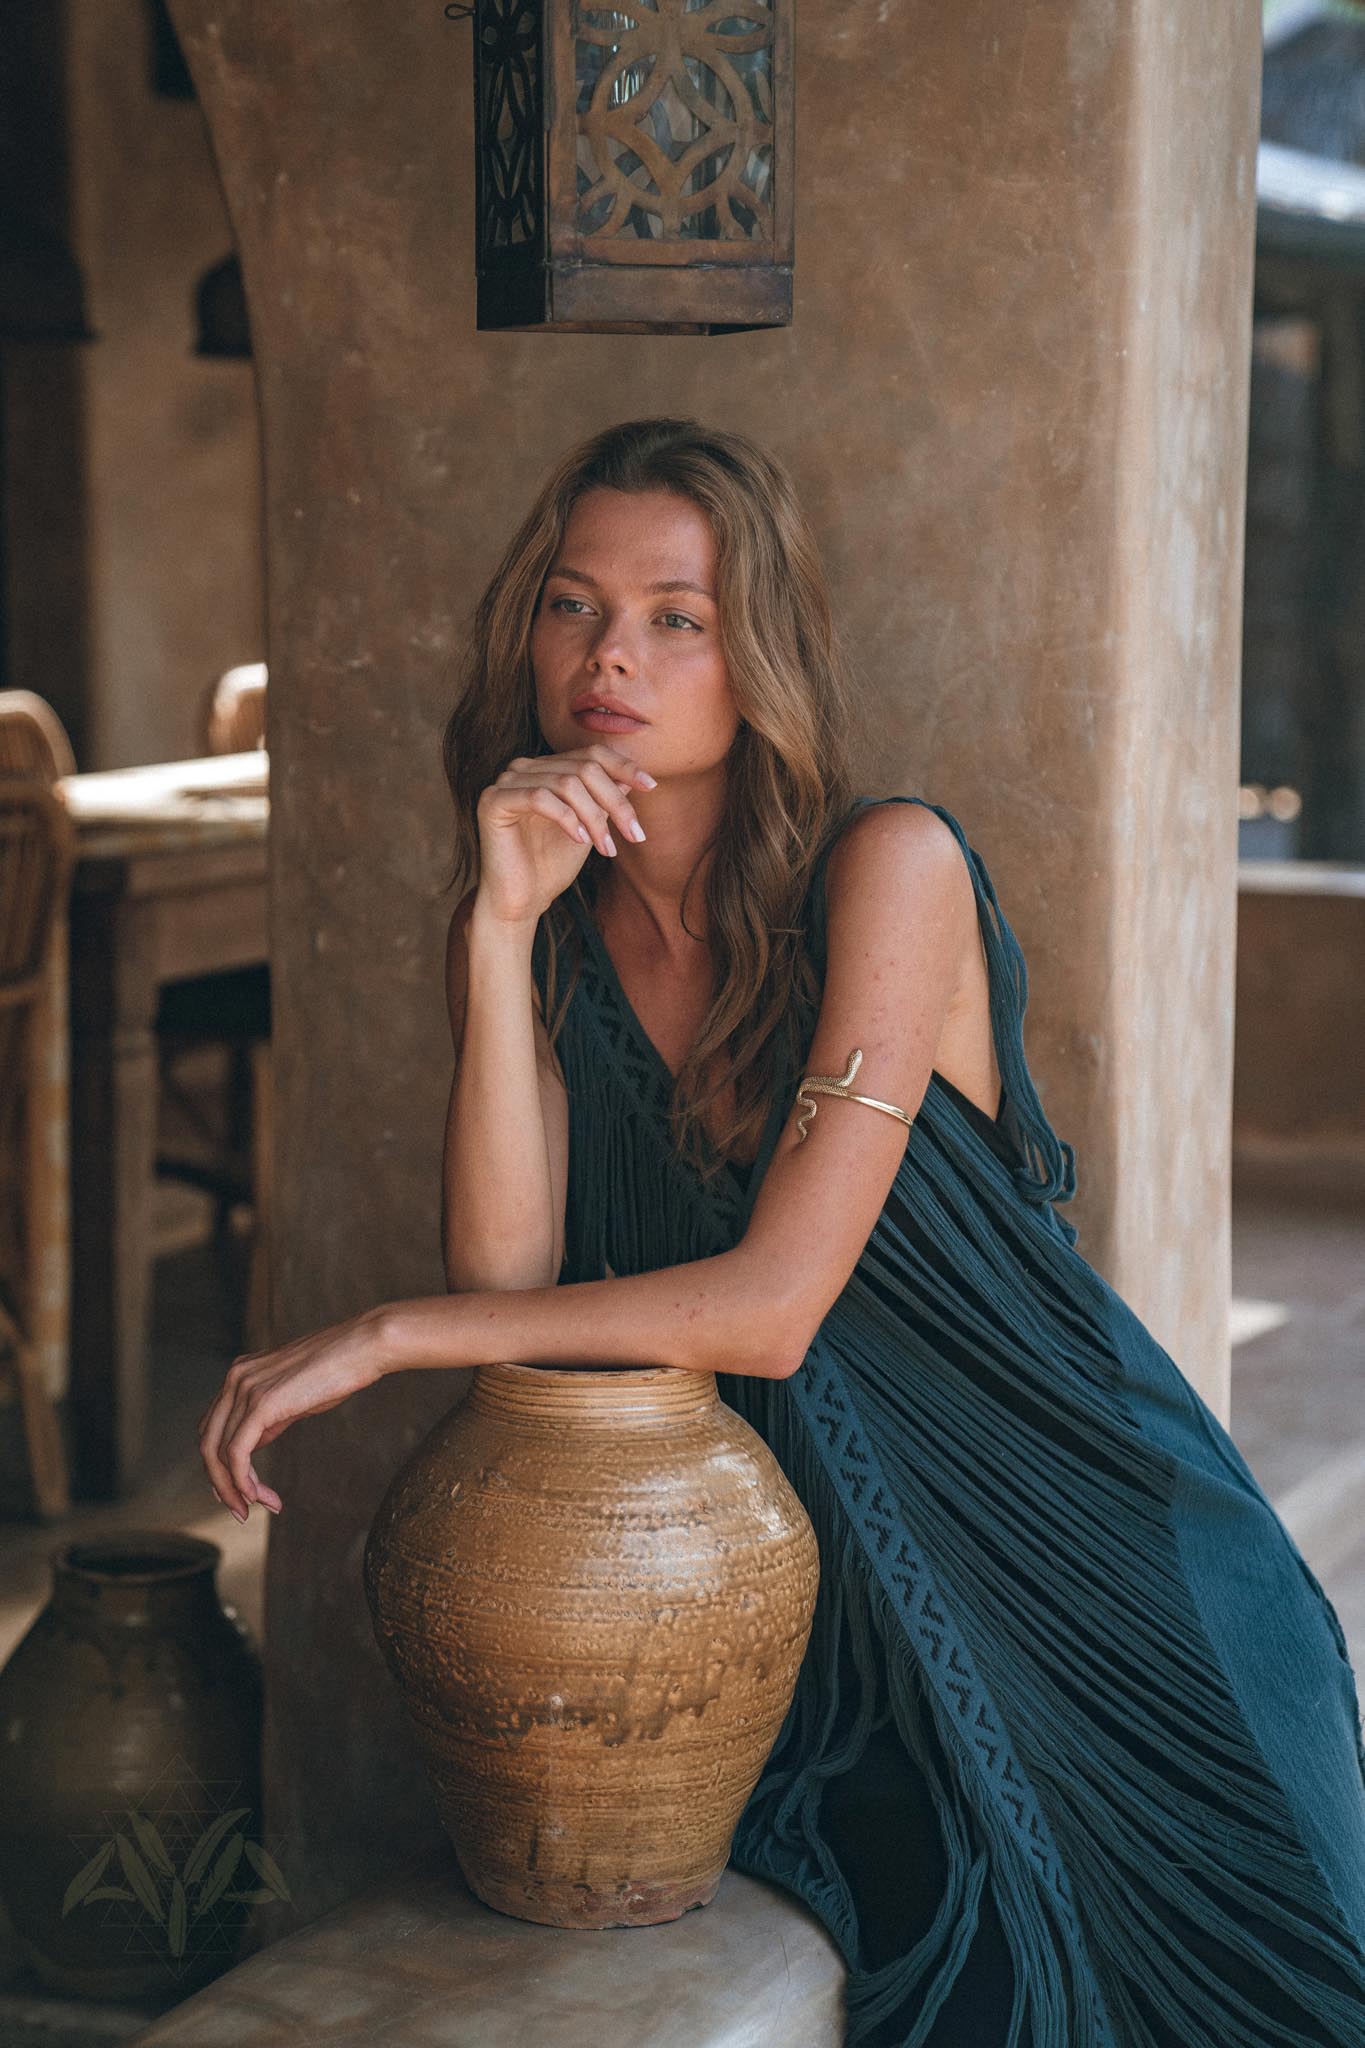 Be unique and beautiful with this asymmetrical maxi dress with handwoven tribal embroidery.